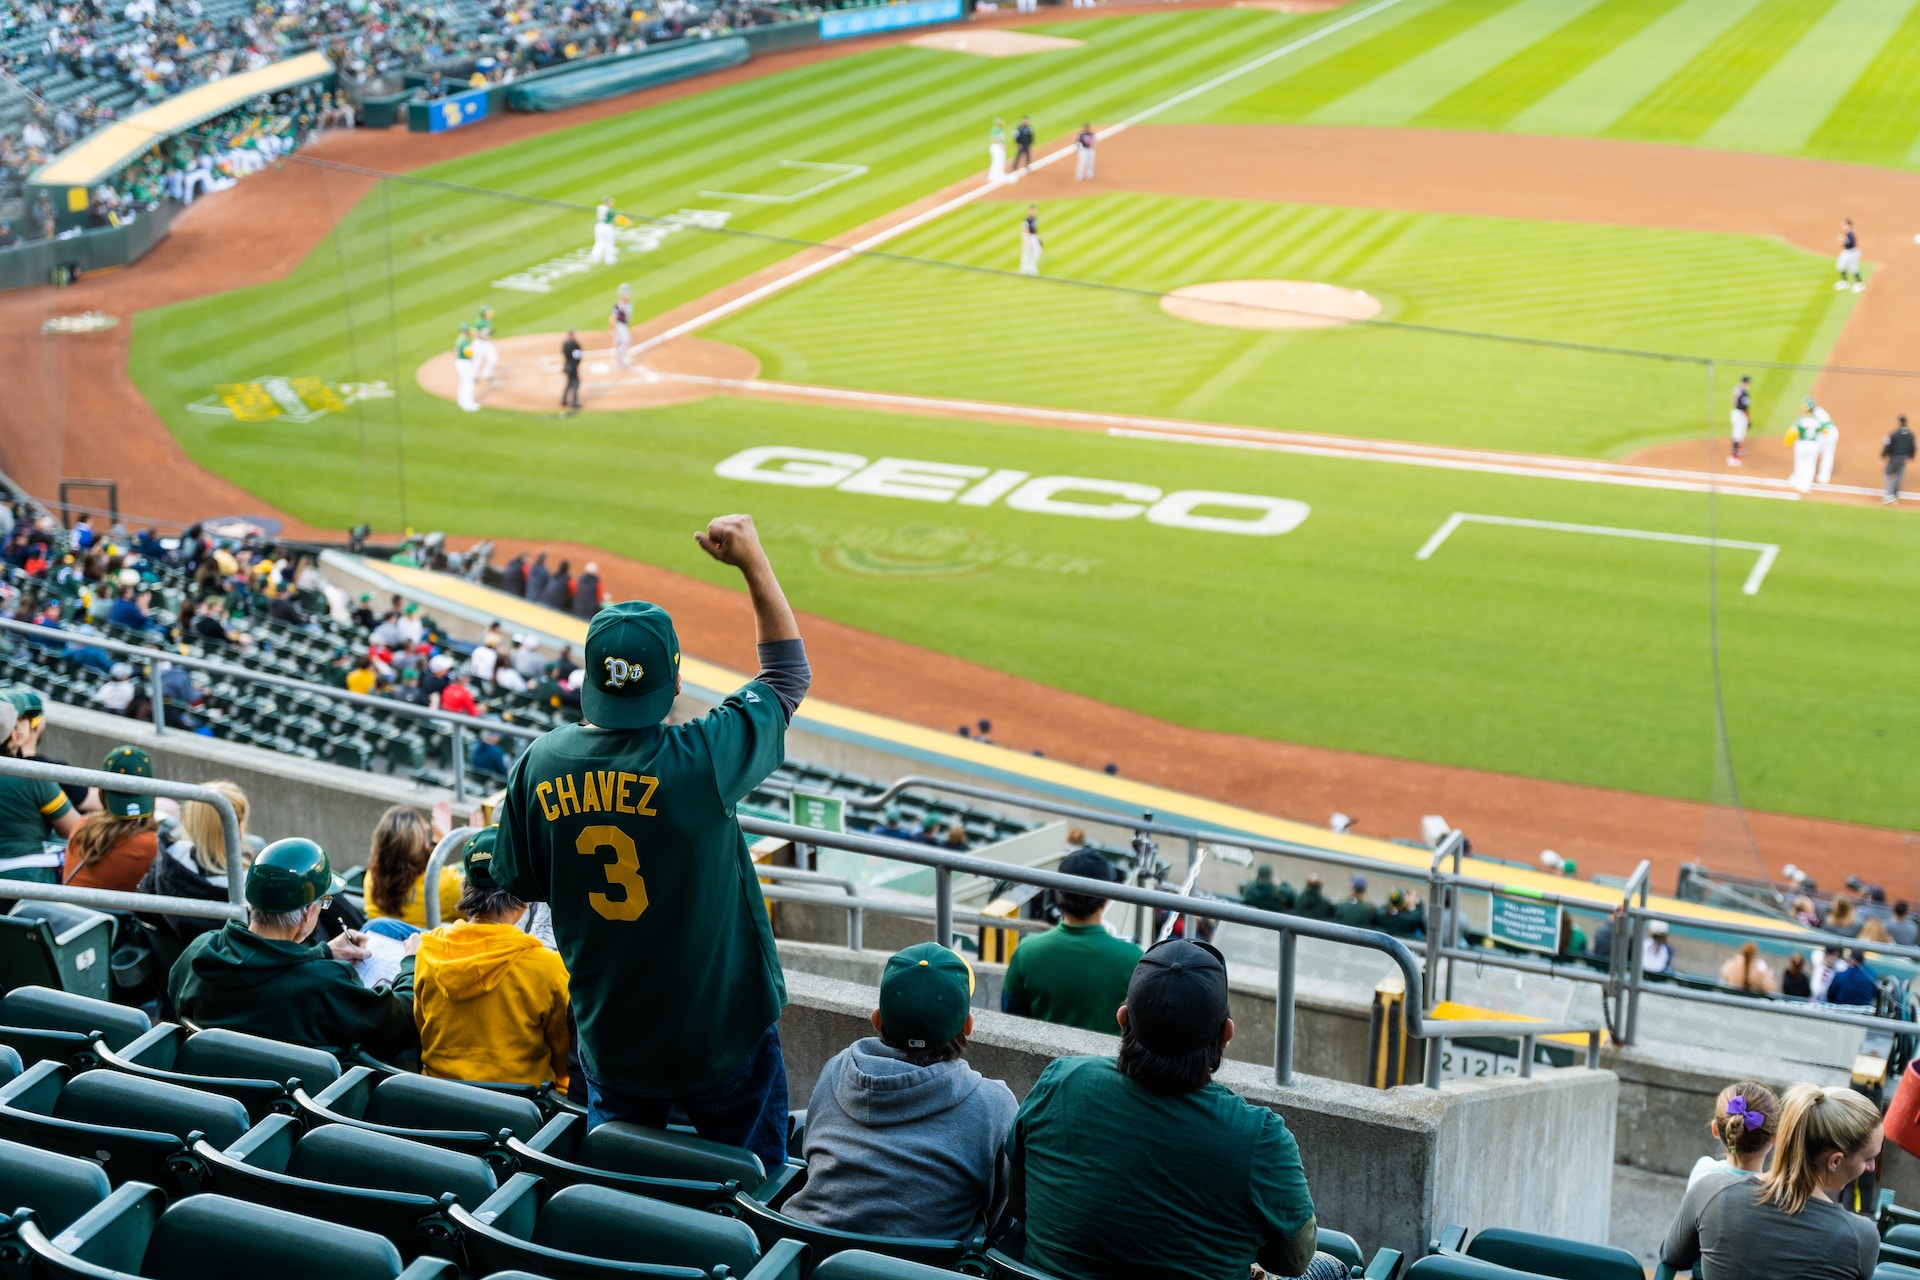 The Oakland Athletics are heading to Las Vegas - but one more